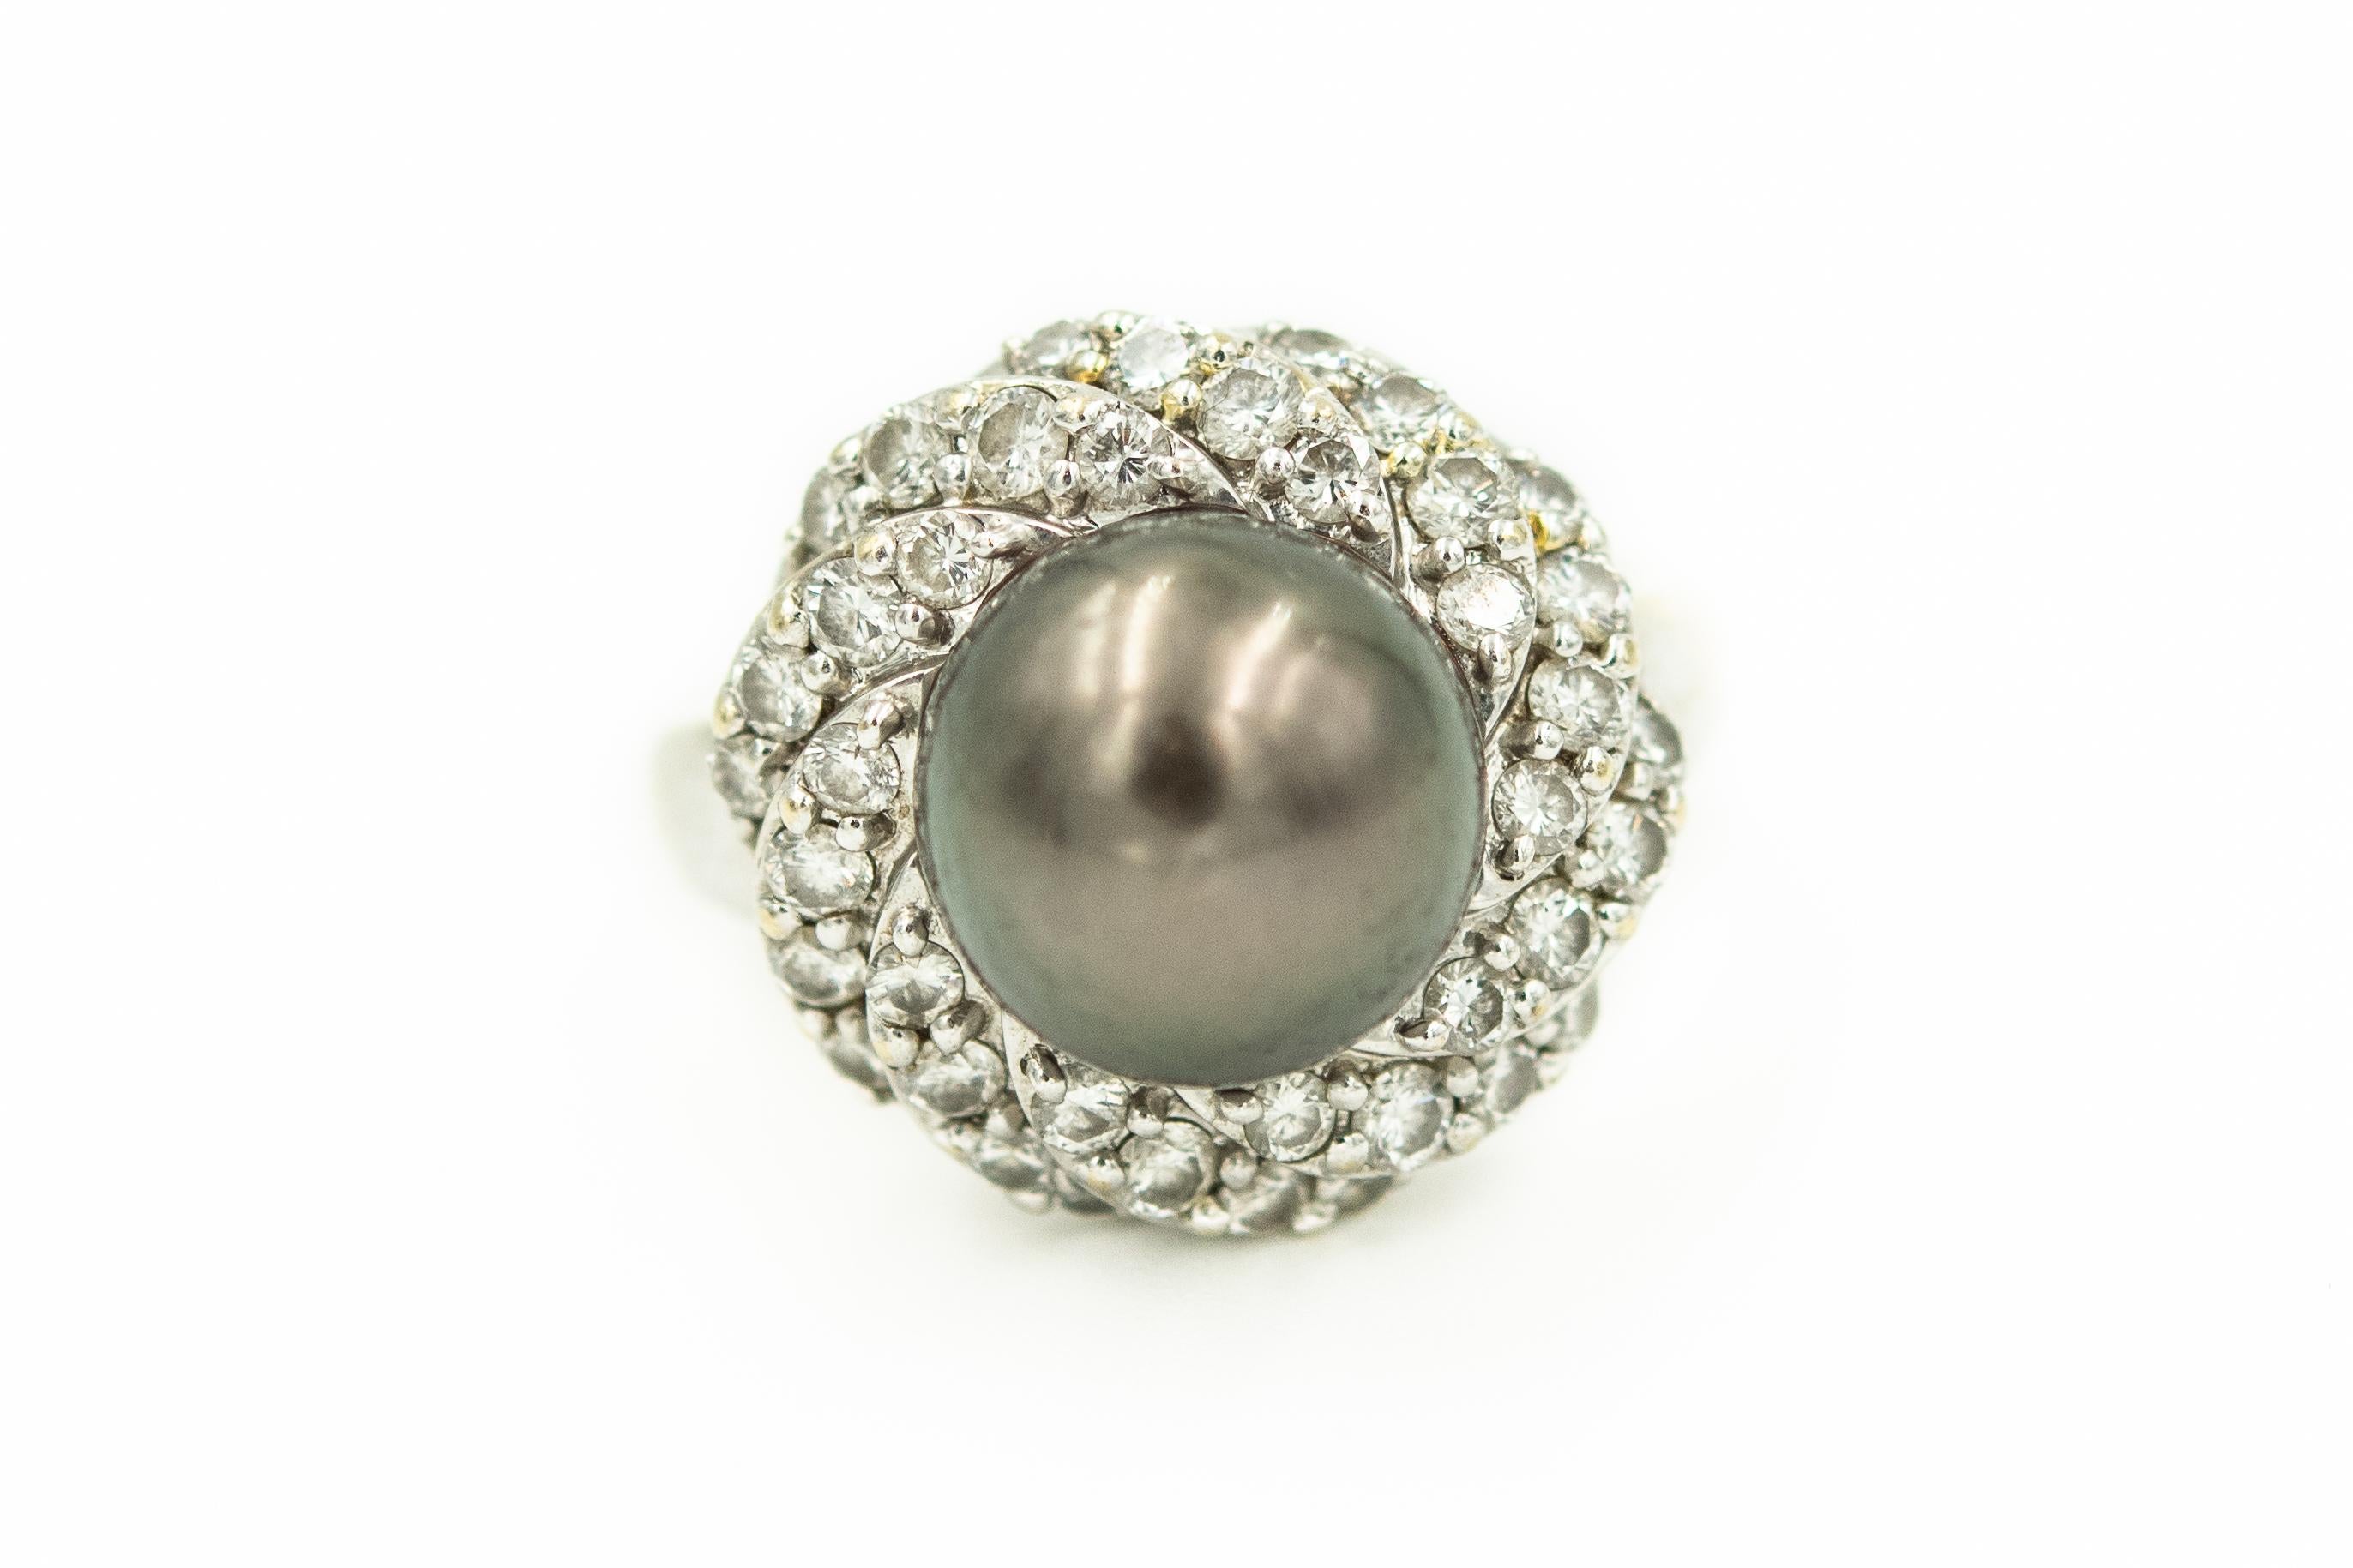 This 18k white gold elegant set features a diamond swirl design around a centrally set gray cultured pearl.  

The ring has a center gray cultured pearl that is approximately 10.5 mm.  It is dark gray with a fair luster and slight blemishes.  It is